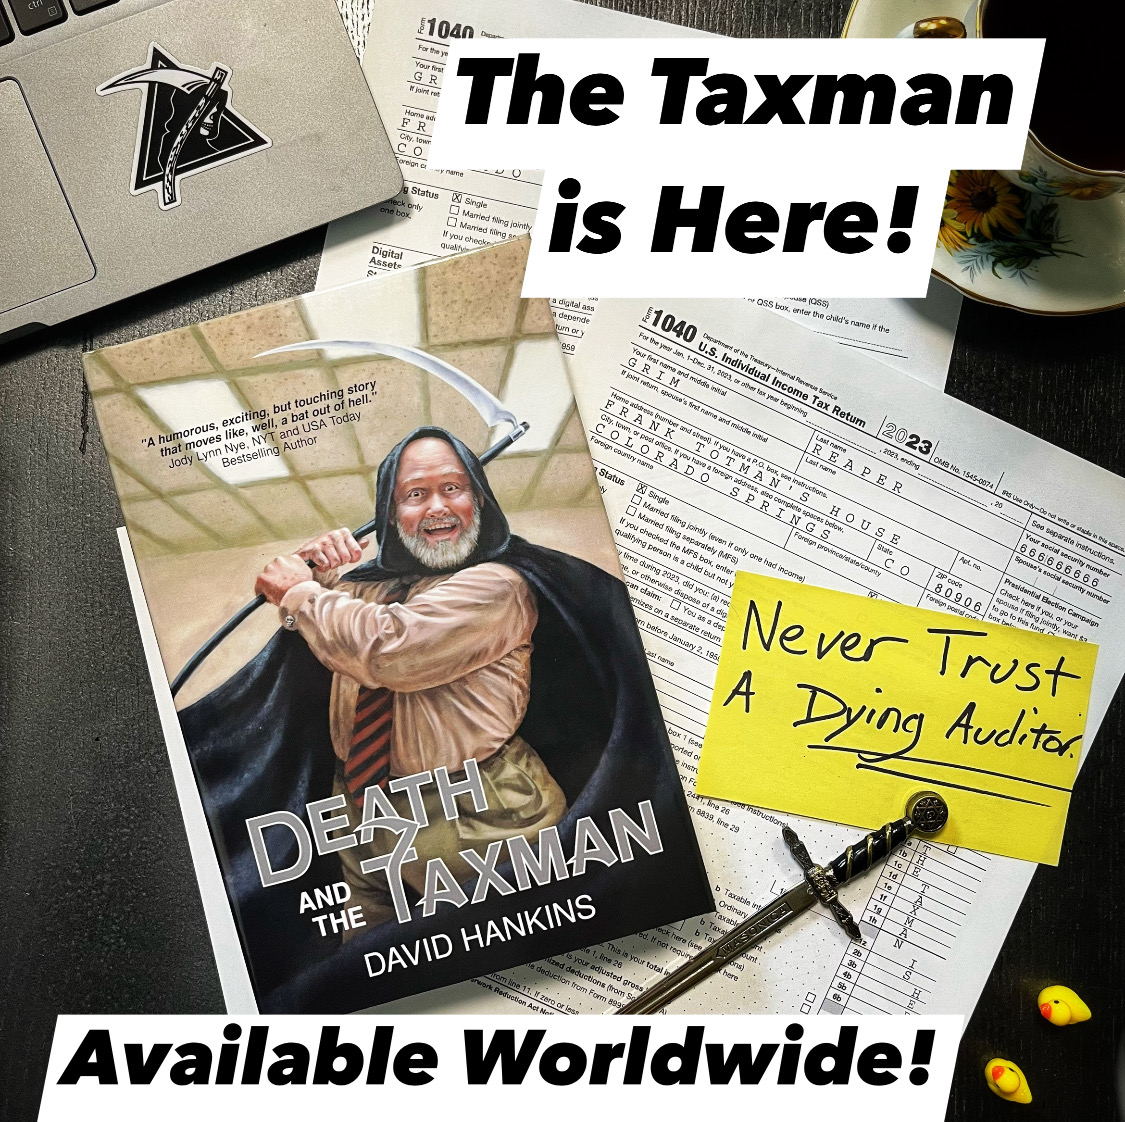 @ChristianWFreed Thrilled to have entered #SPFBOX with my new release Death and the Taxman. Fingers crossed!

The Grim Reaper, trapped in an IRS agent's dying body, has to regain his powers before he dies and faces judgment for his original sin.

books2read.com/deathandthetax…

#deathandthetaxman